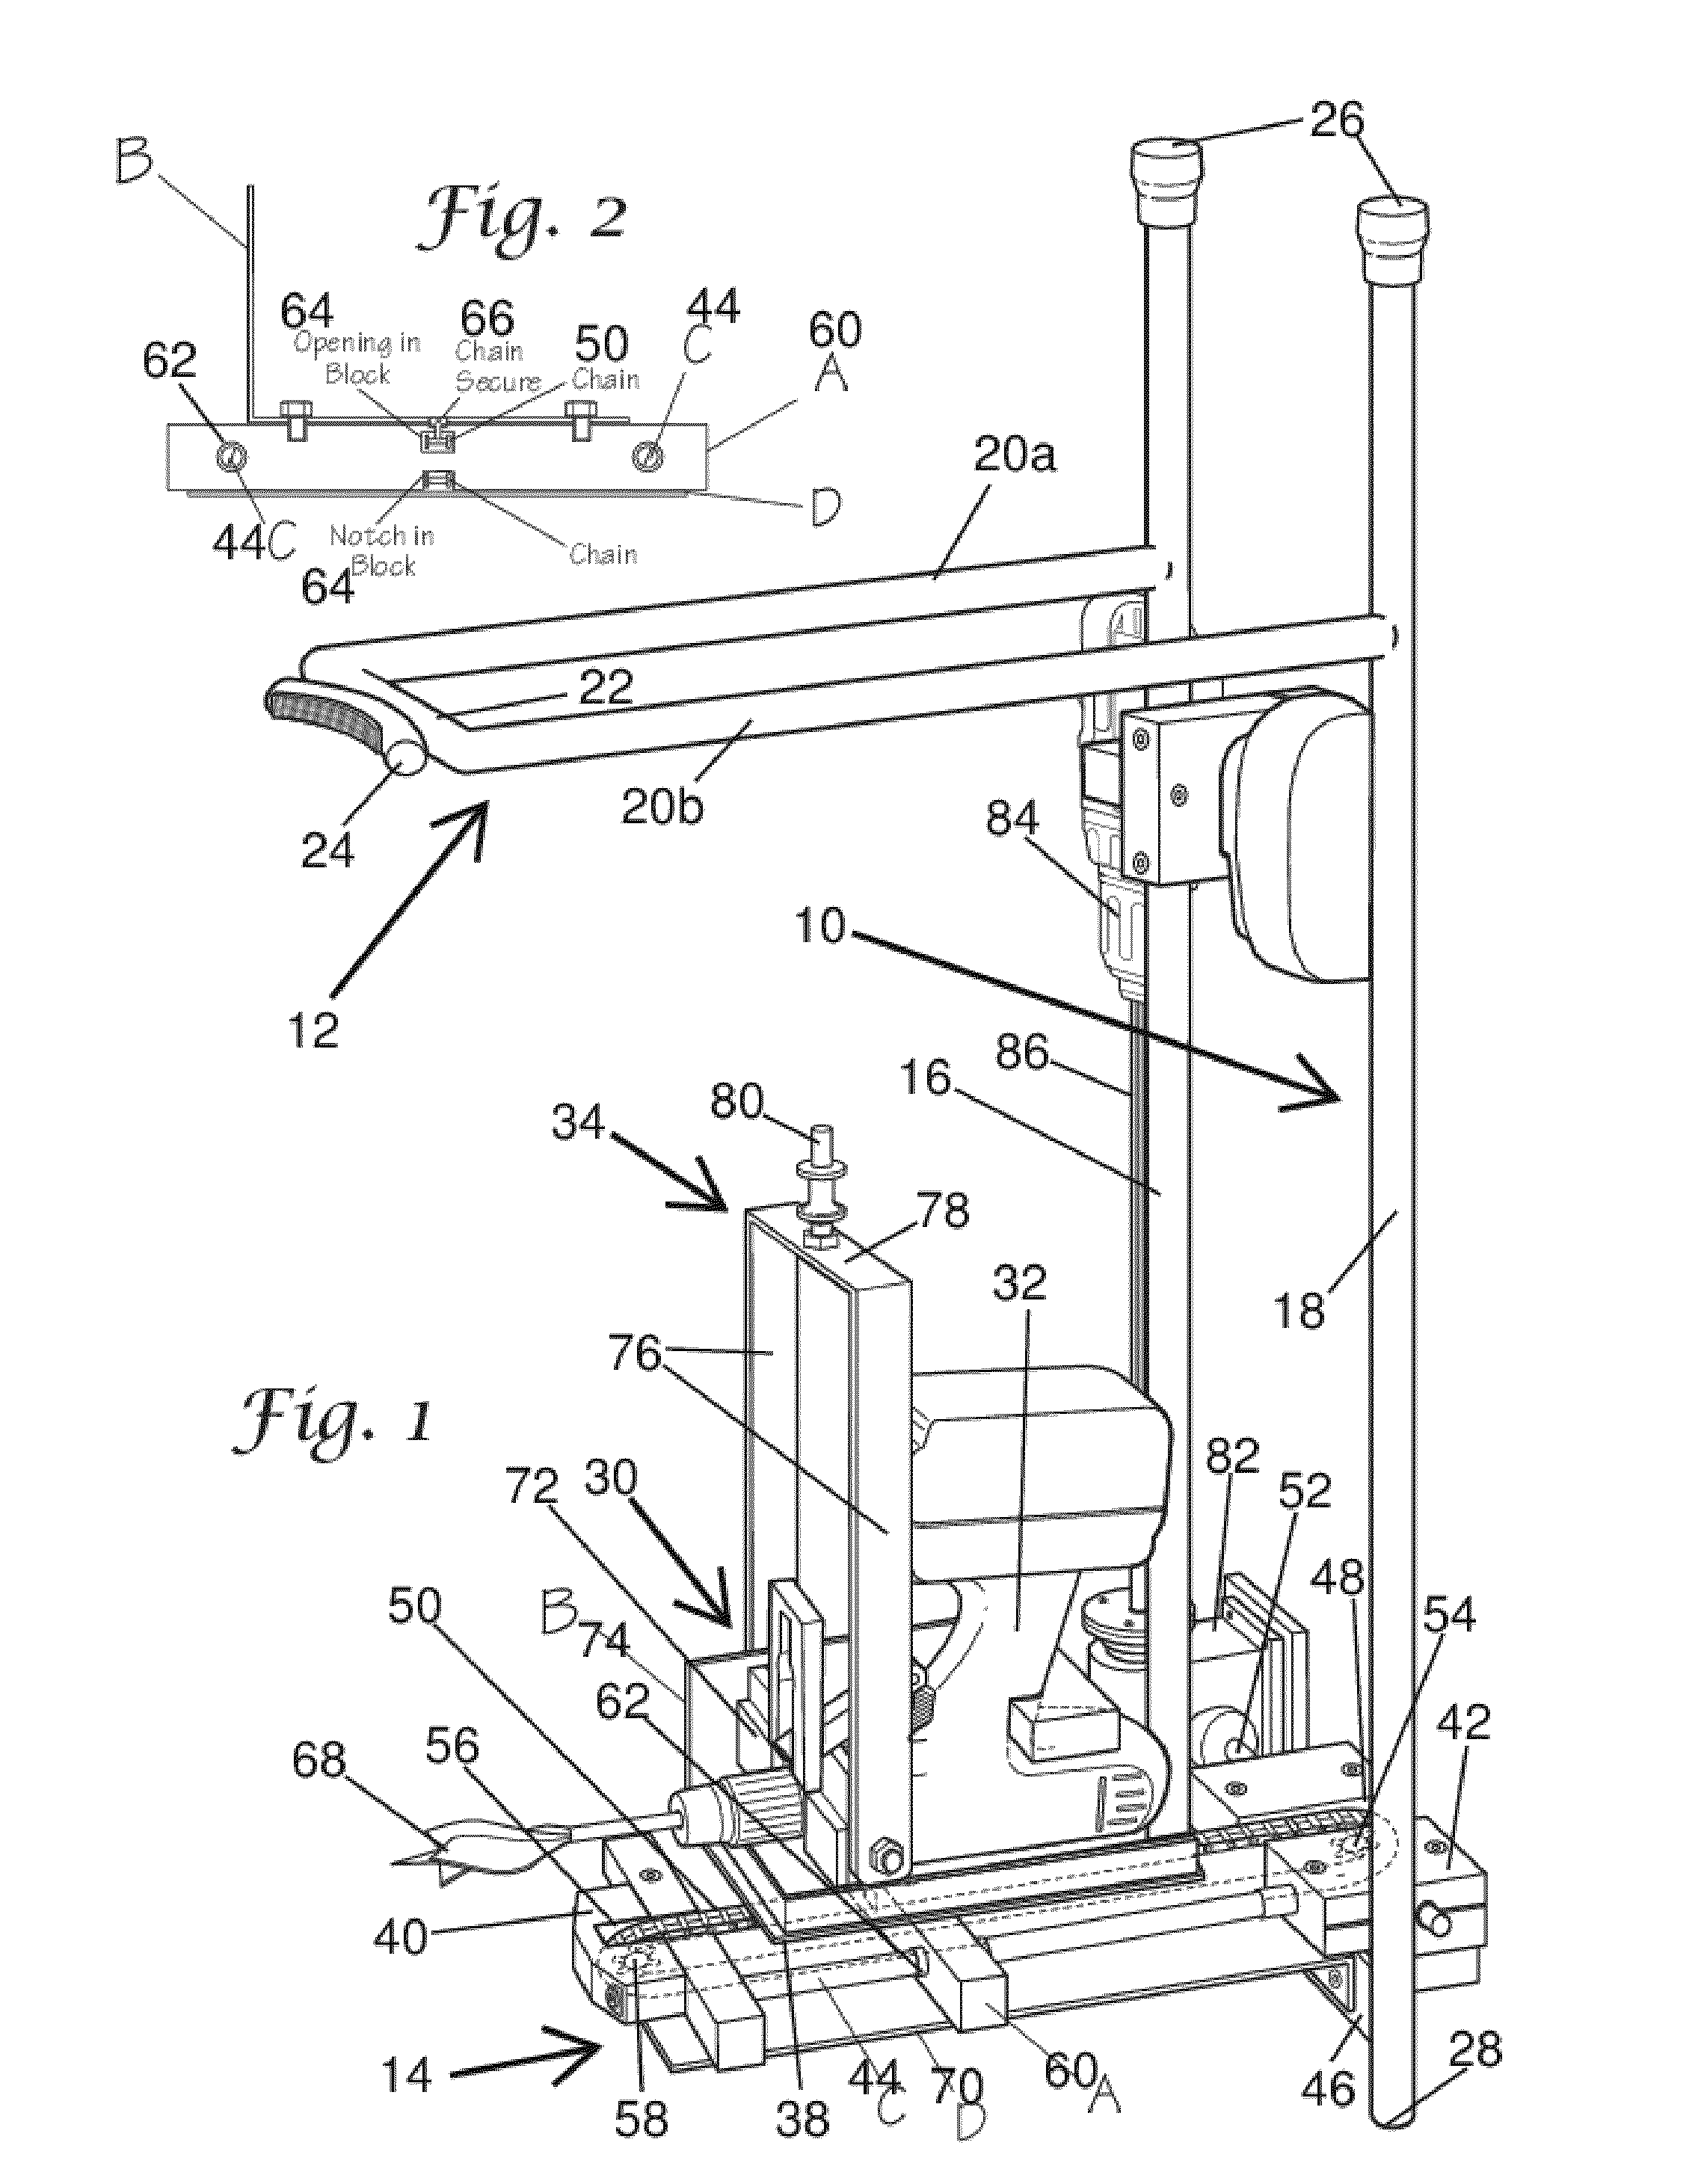 Apparatus for Tapping Trees